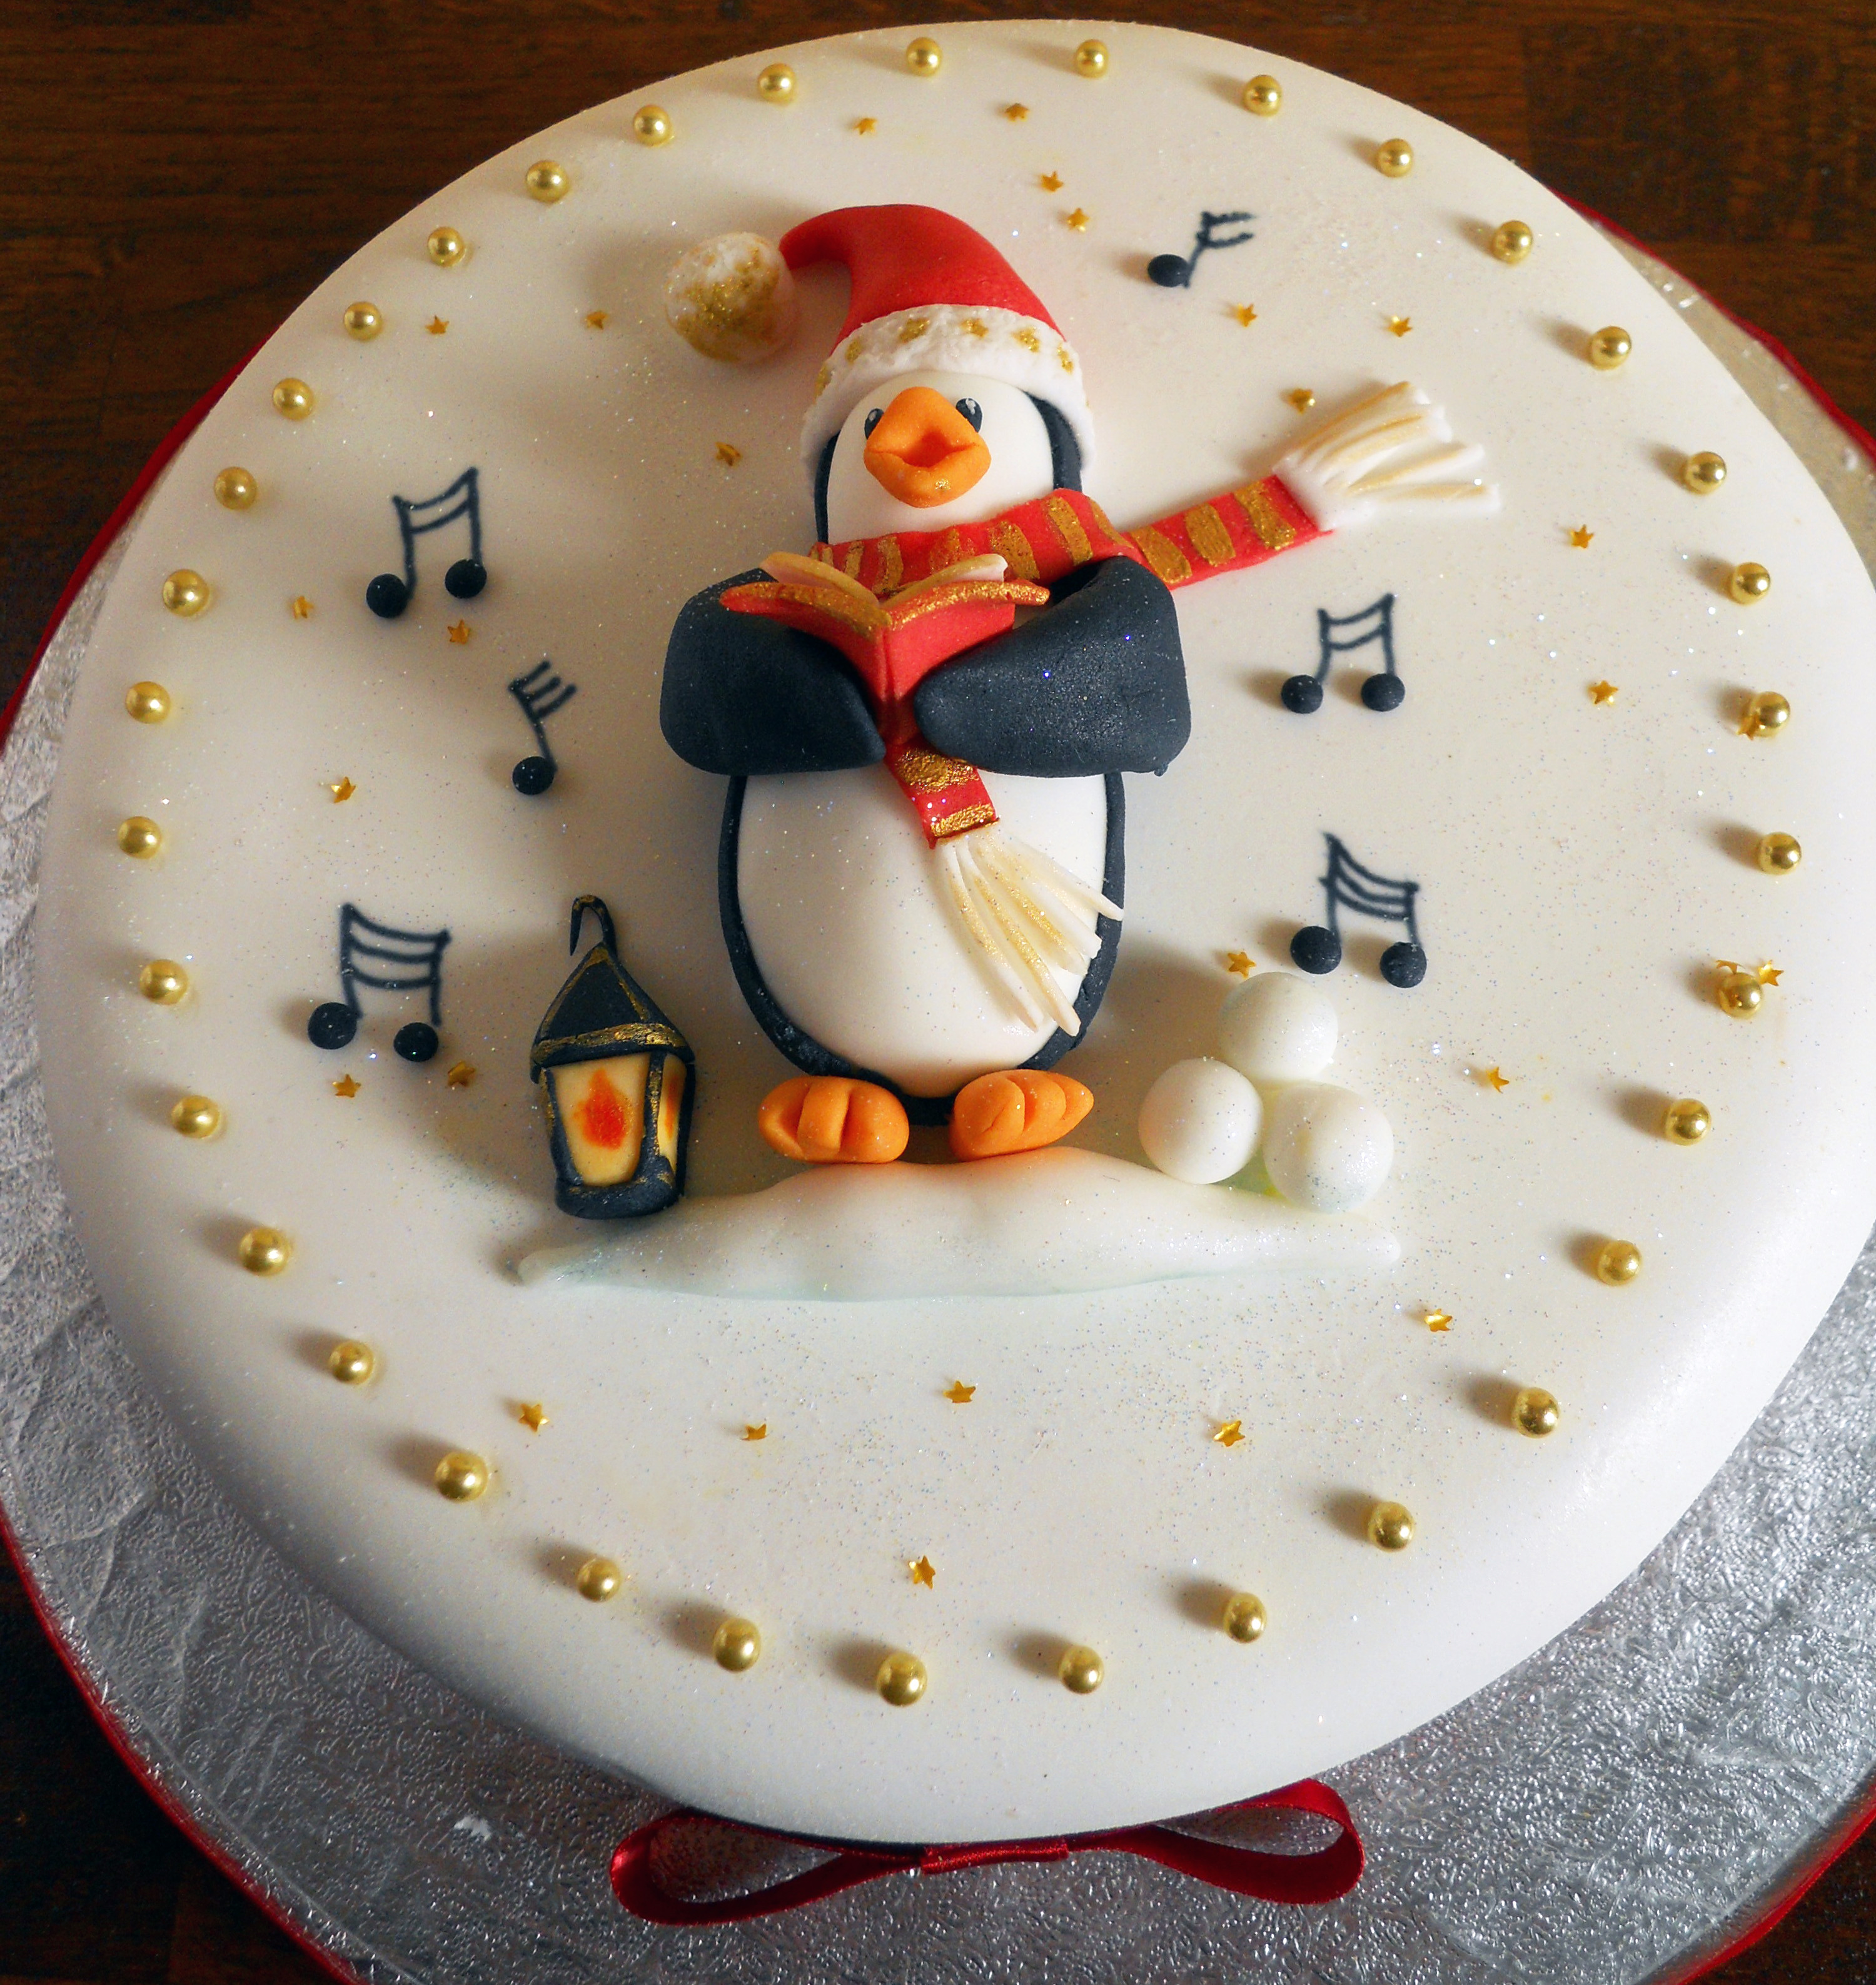 Christmas Cakes Pictures
 Penguin Carol Singer Christmas Cake – Orders now being taken